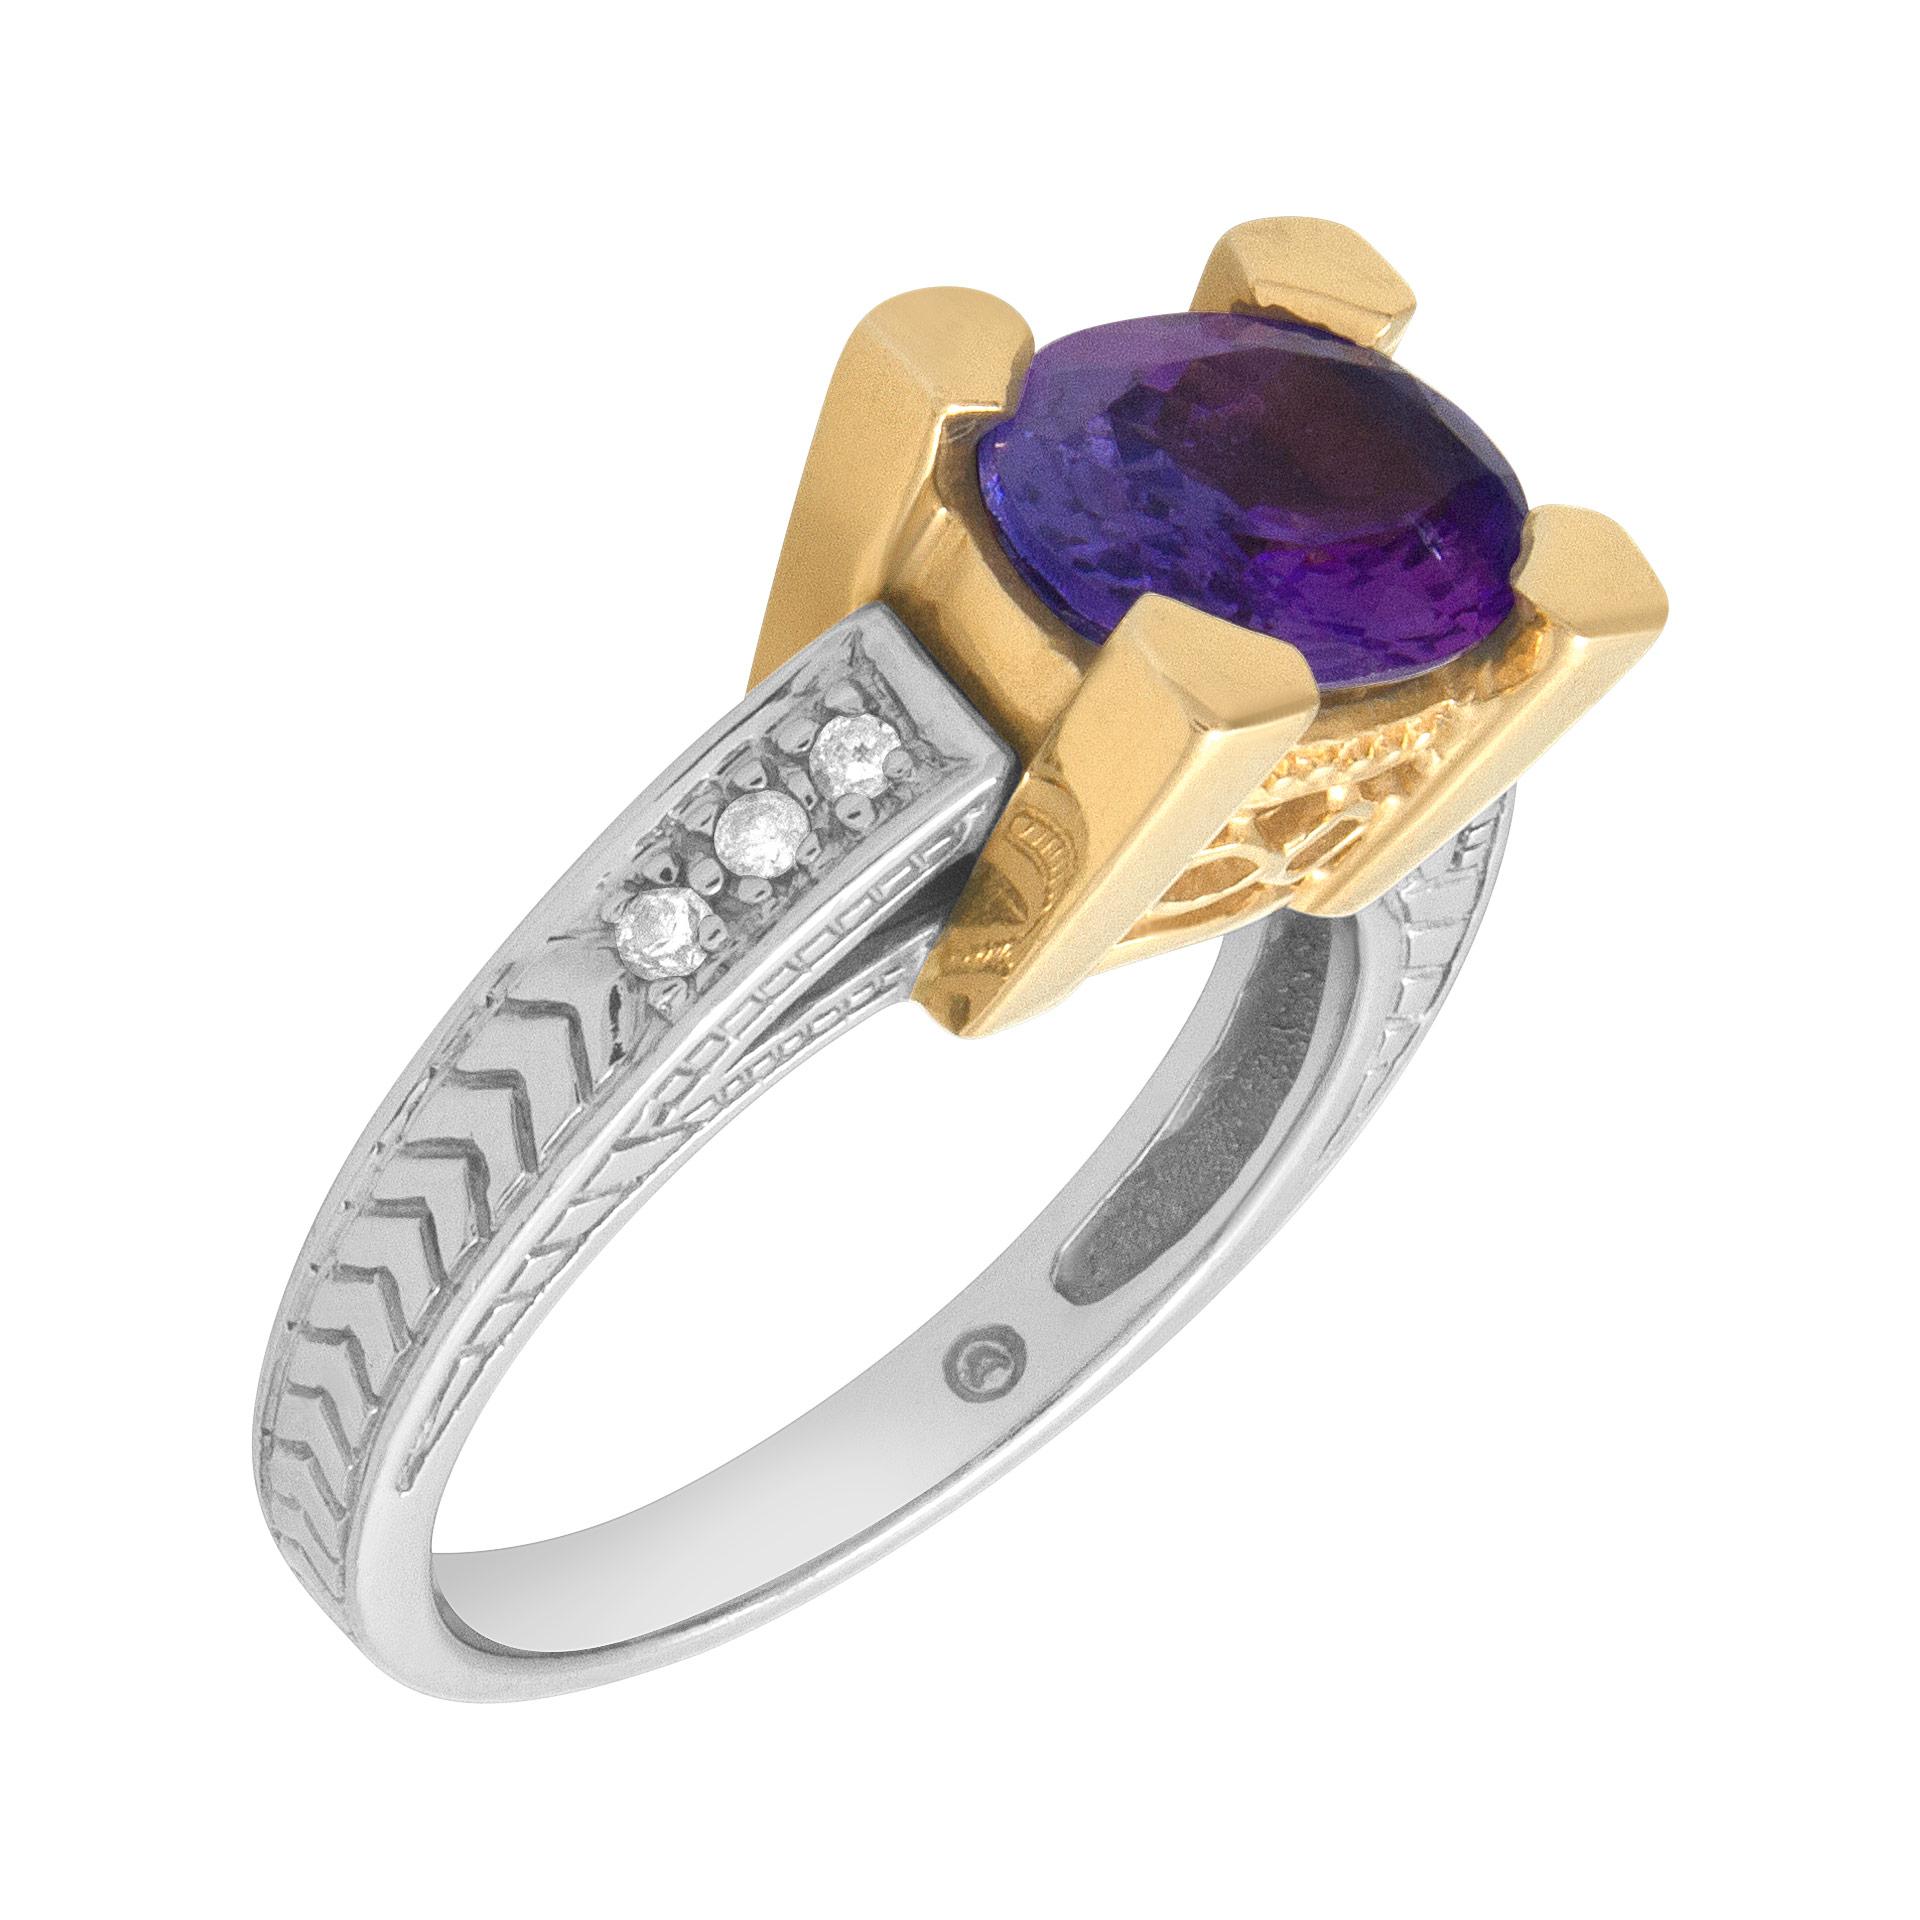 Beautiful tanzanite ring (1.50 cts) with diamond accents in 14k white and yellow gold. Size 6. Top of the ring measures 8mm x 9.5mm; shank measures 2mm.

This ring is currently size 6 and some items can be sized up or down, please ask! It weighs 4.1